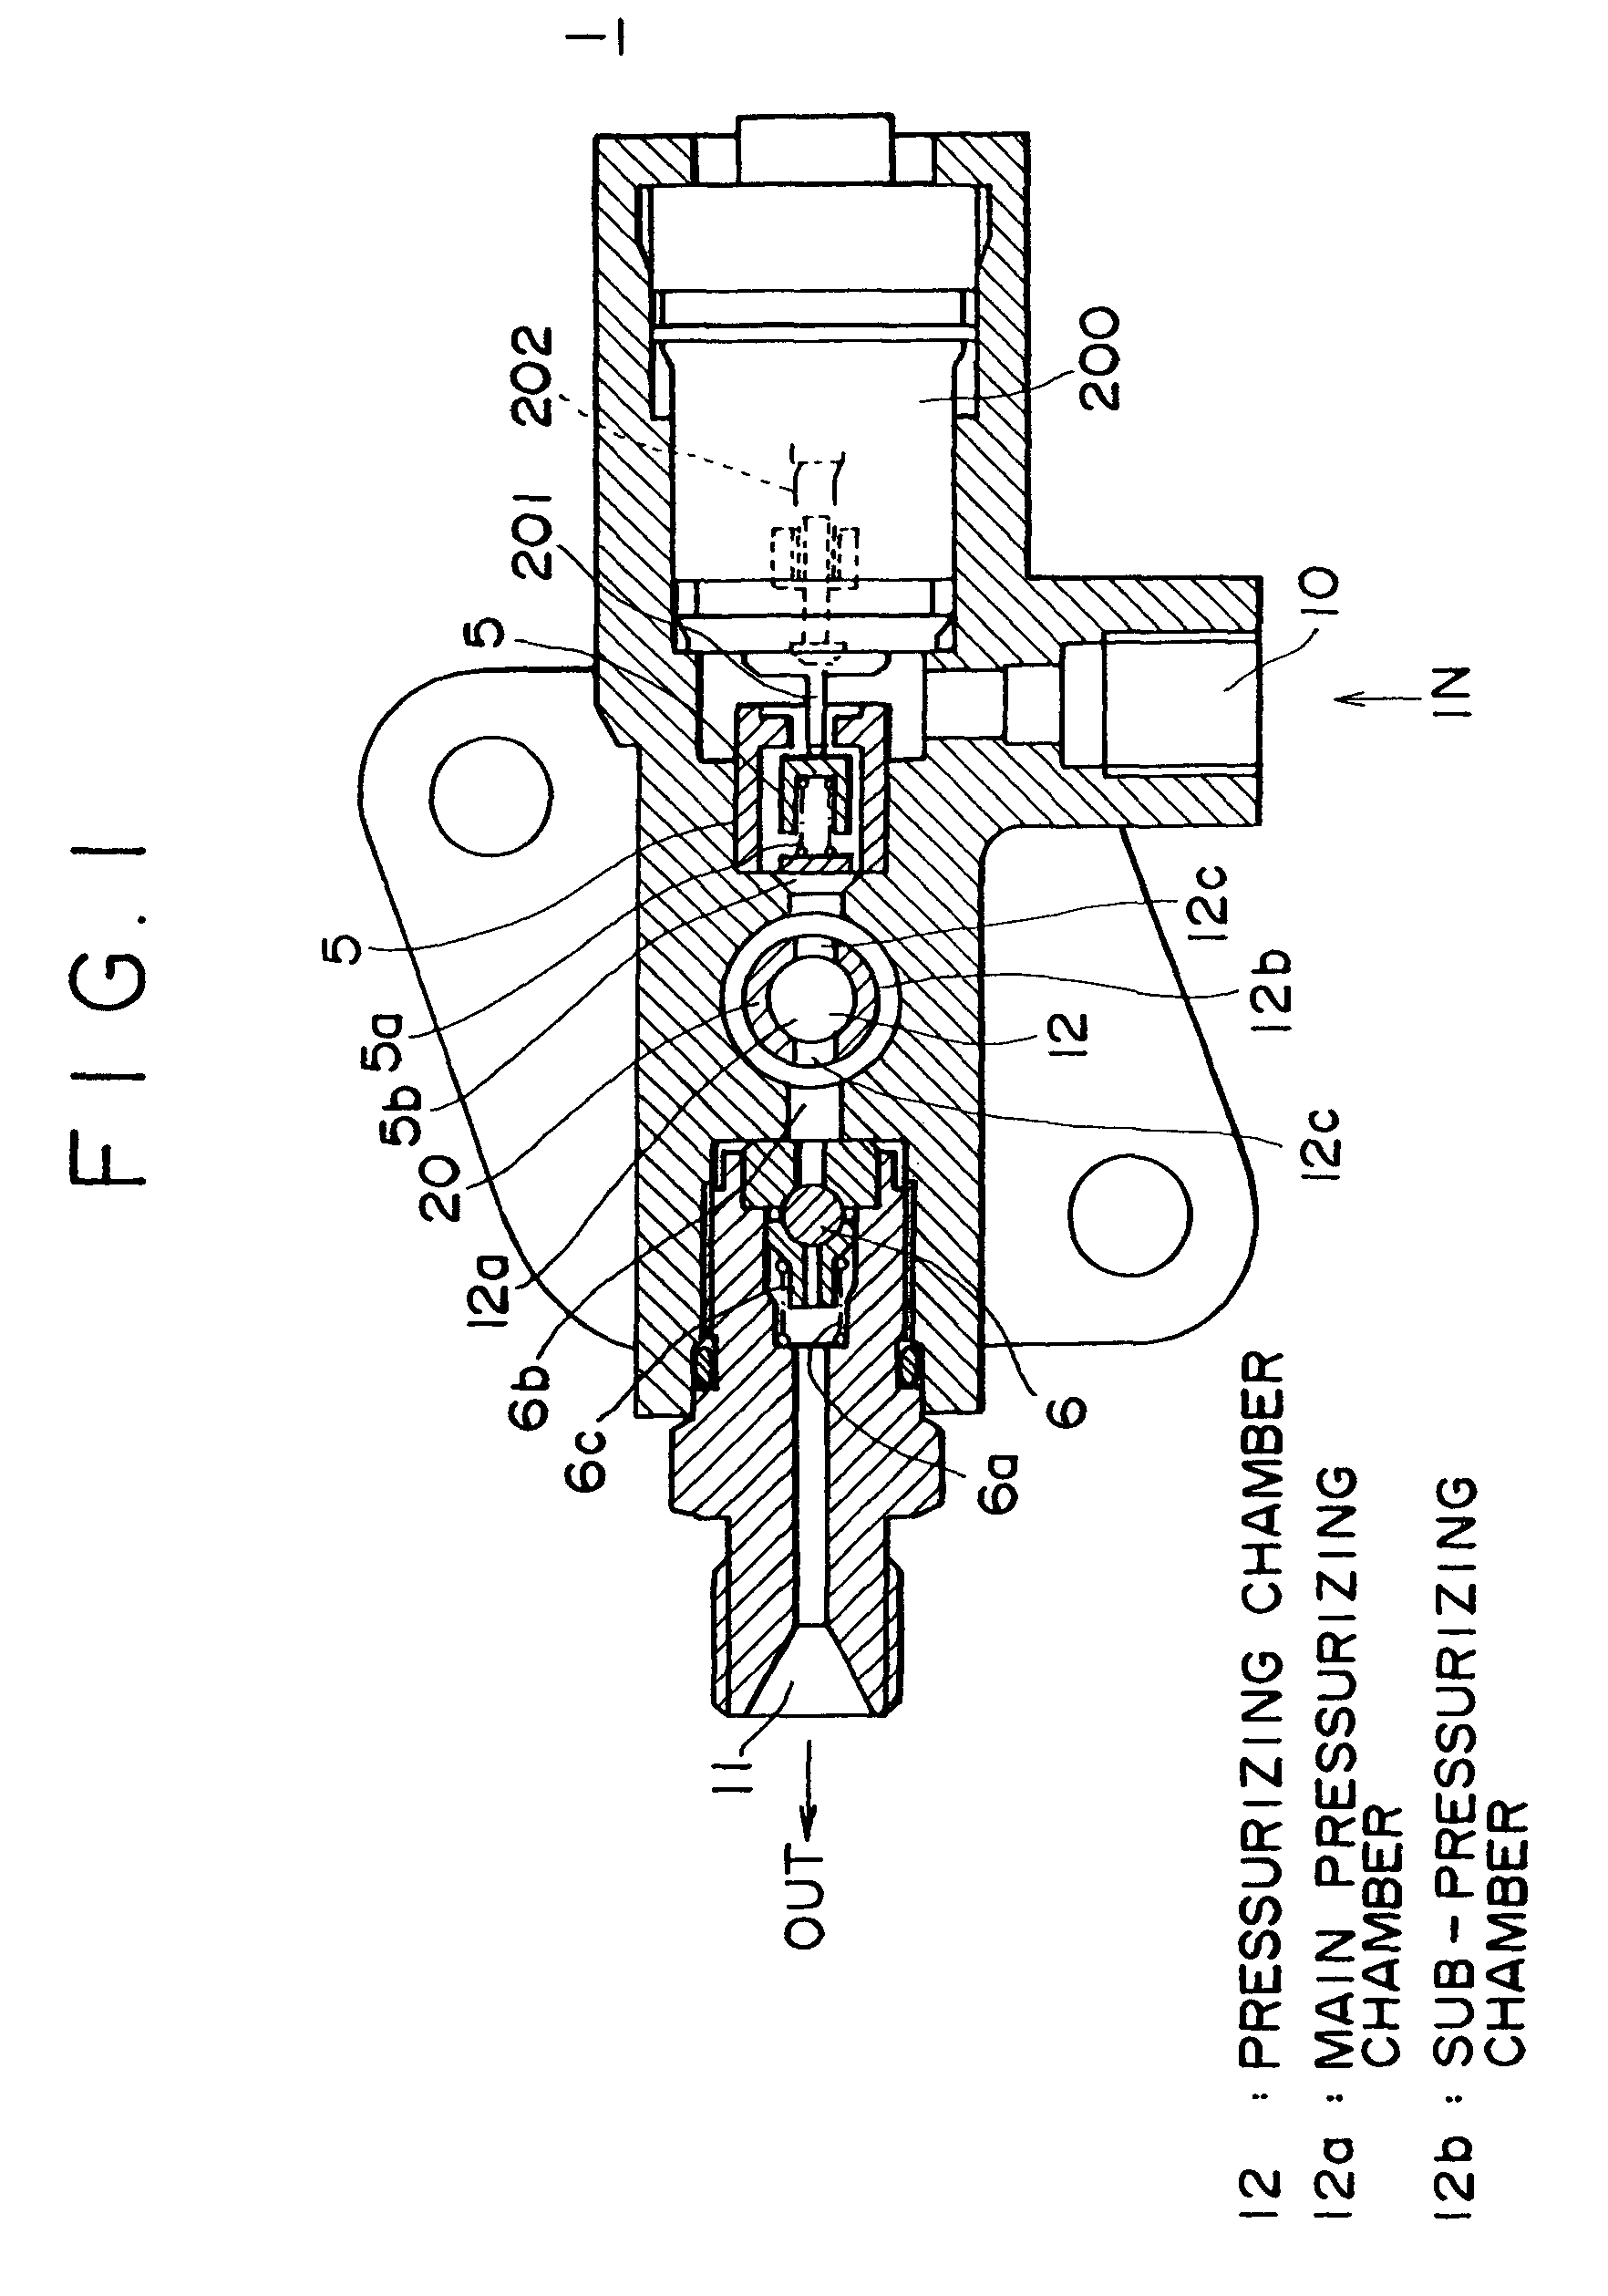 High pressure fuel supply pump for internal combustion engine